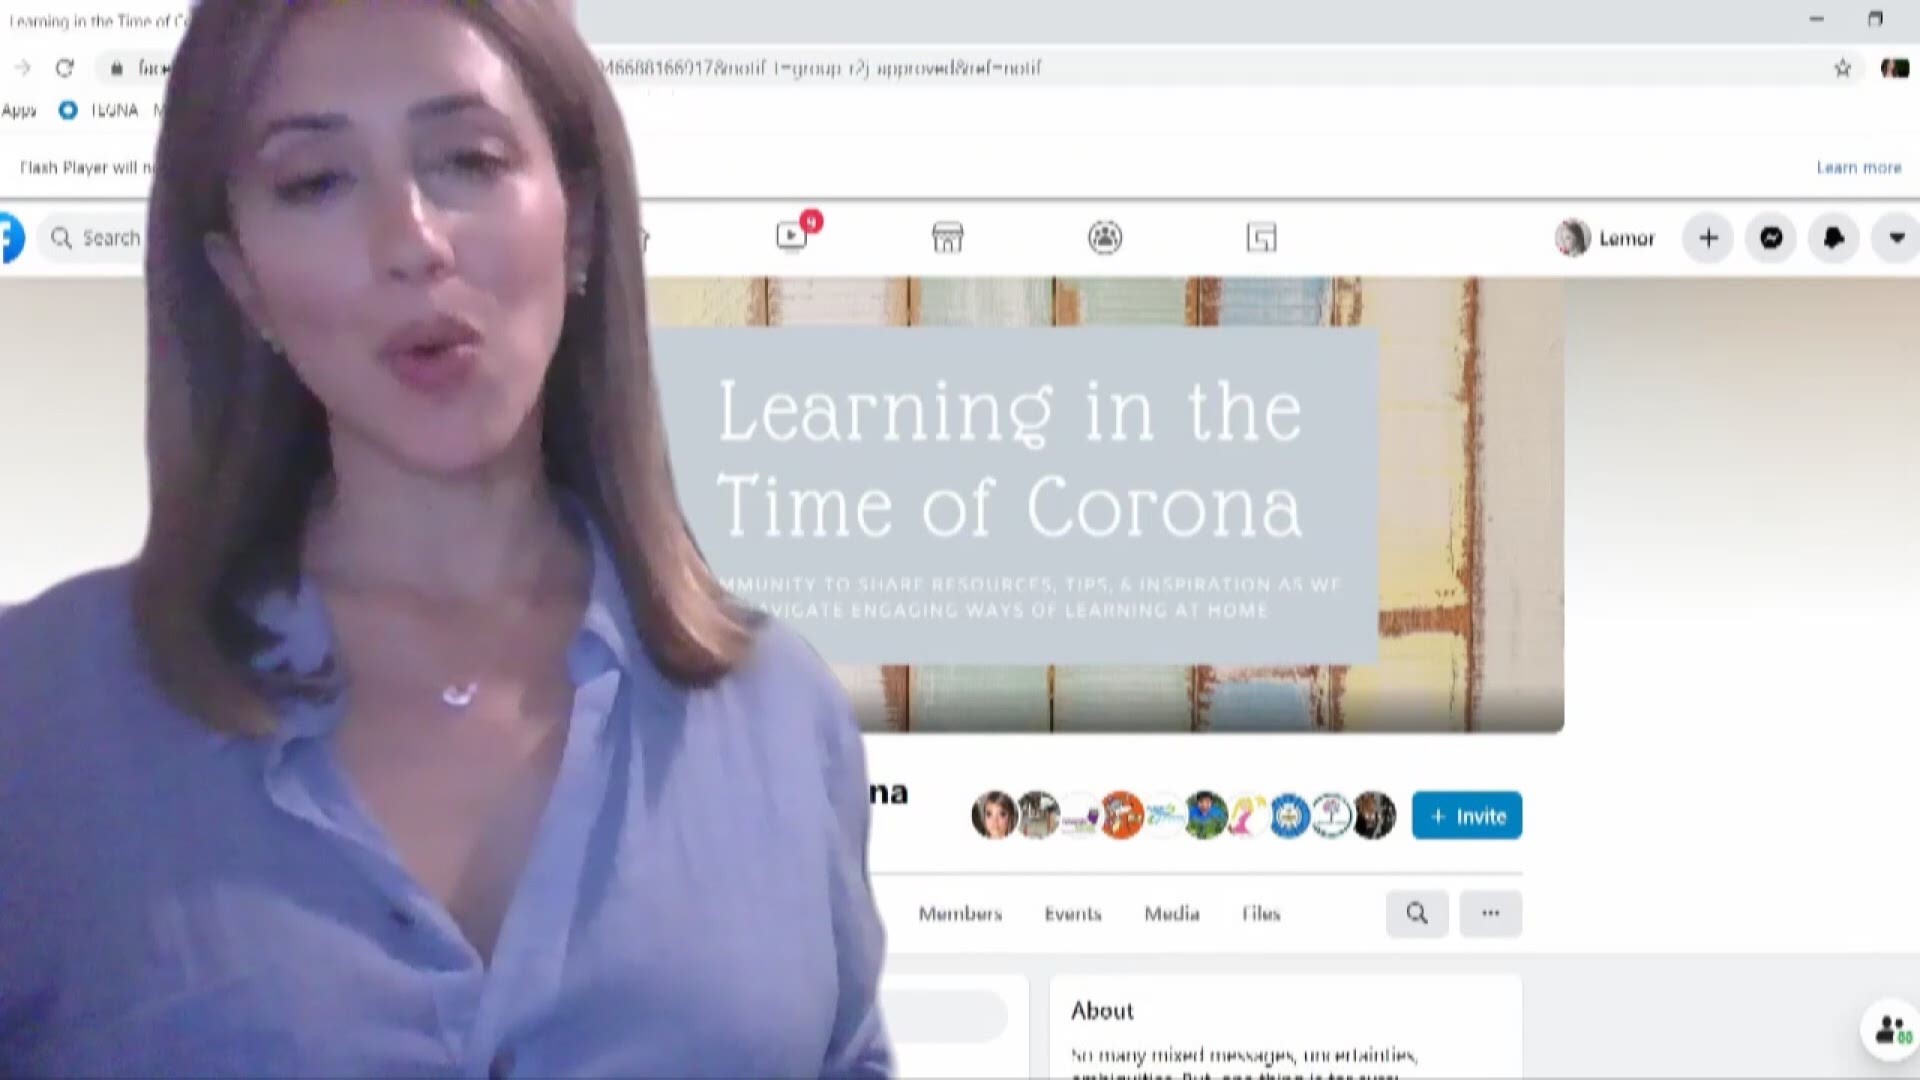 Between Zoom and social networks, there's a lot to learn in the time of corona.